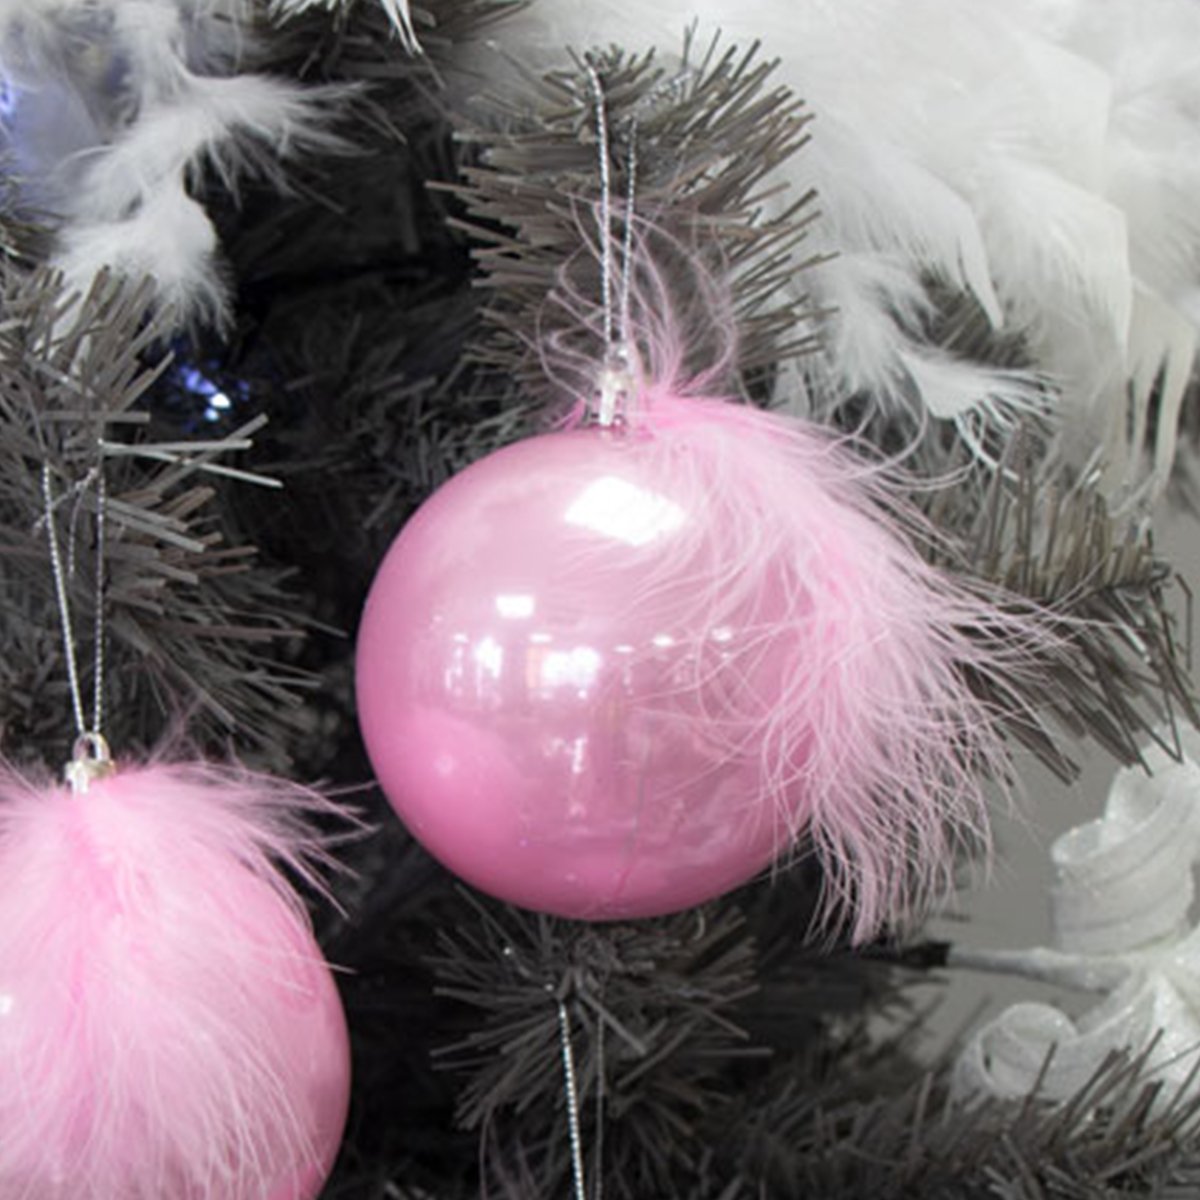 Set of 3 Pearlescent Pink Feather Baubles - 8cm